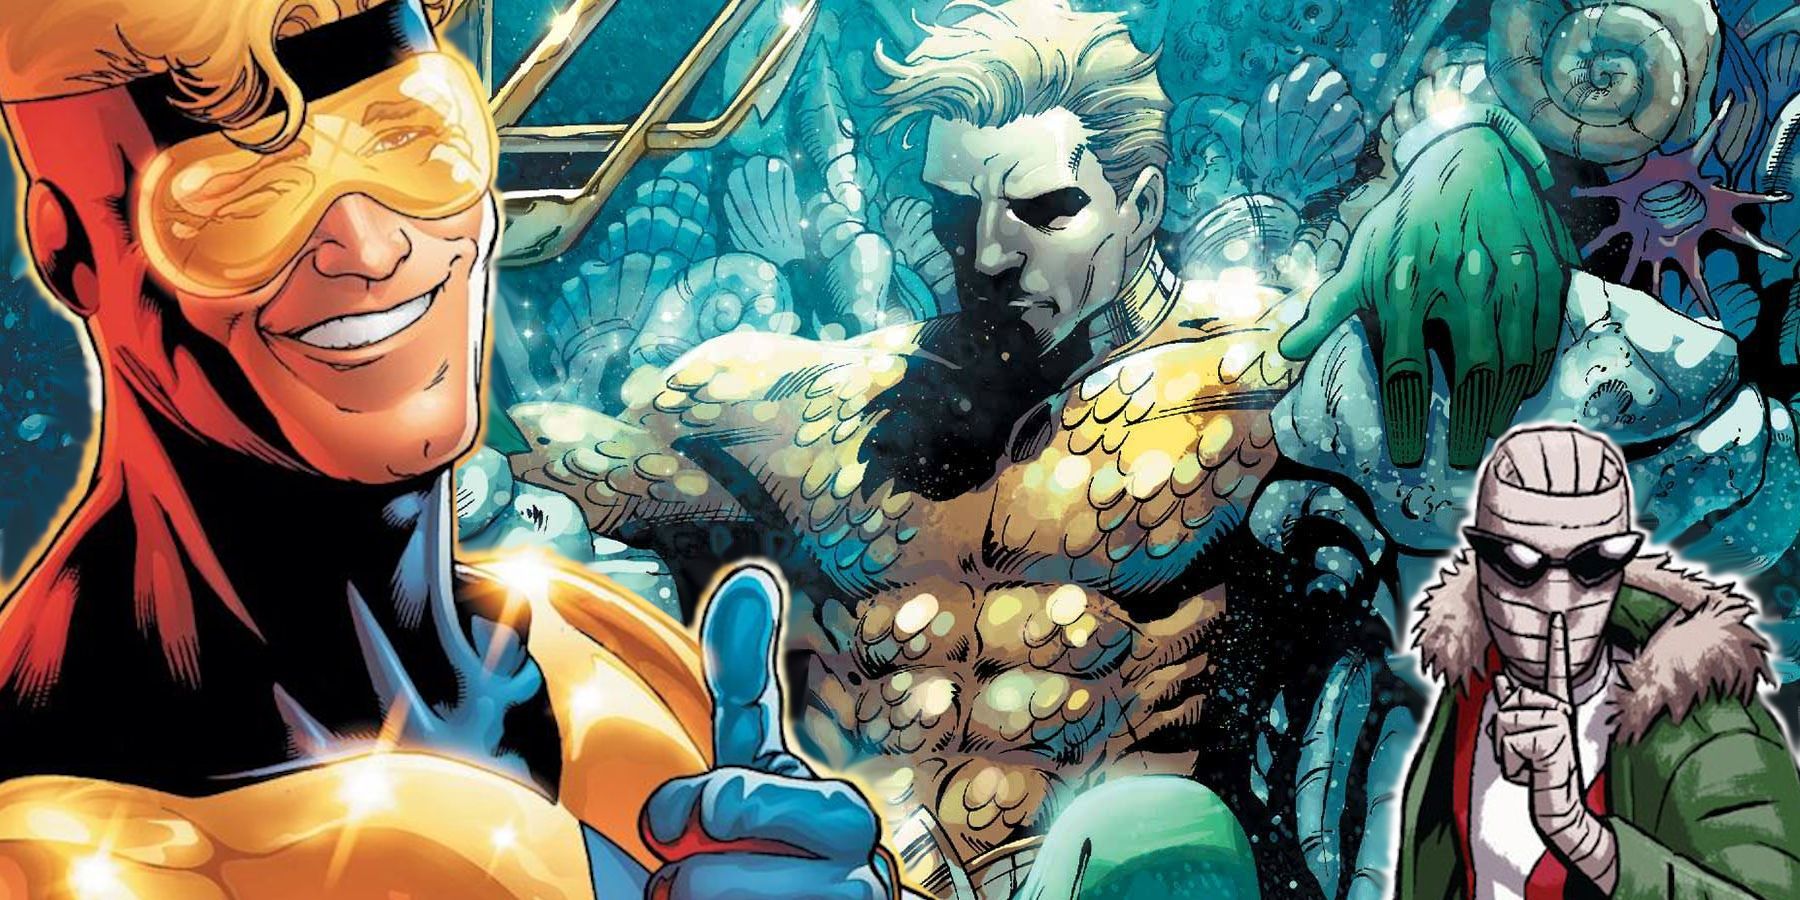 Booster Gold smiling with a thumbs up, Aquaman on his throne, with Negative Man putting one finger to his lips in a collage